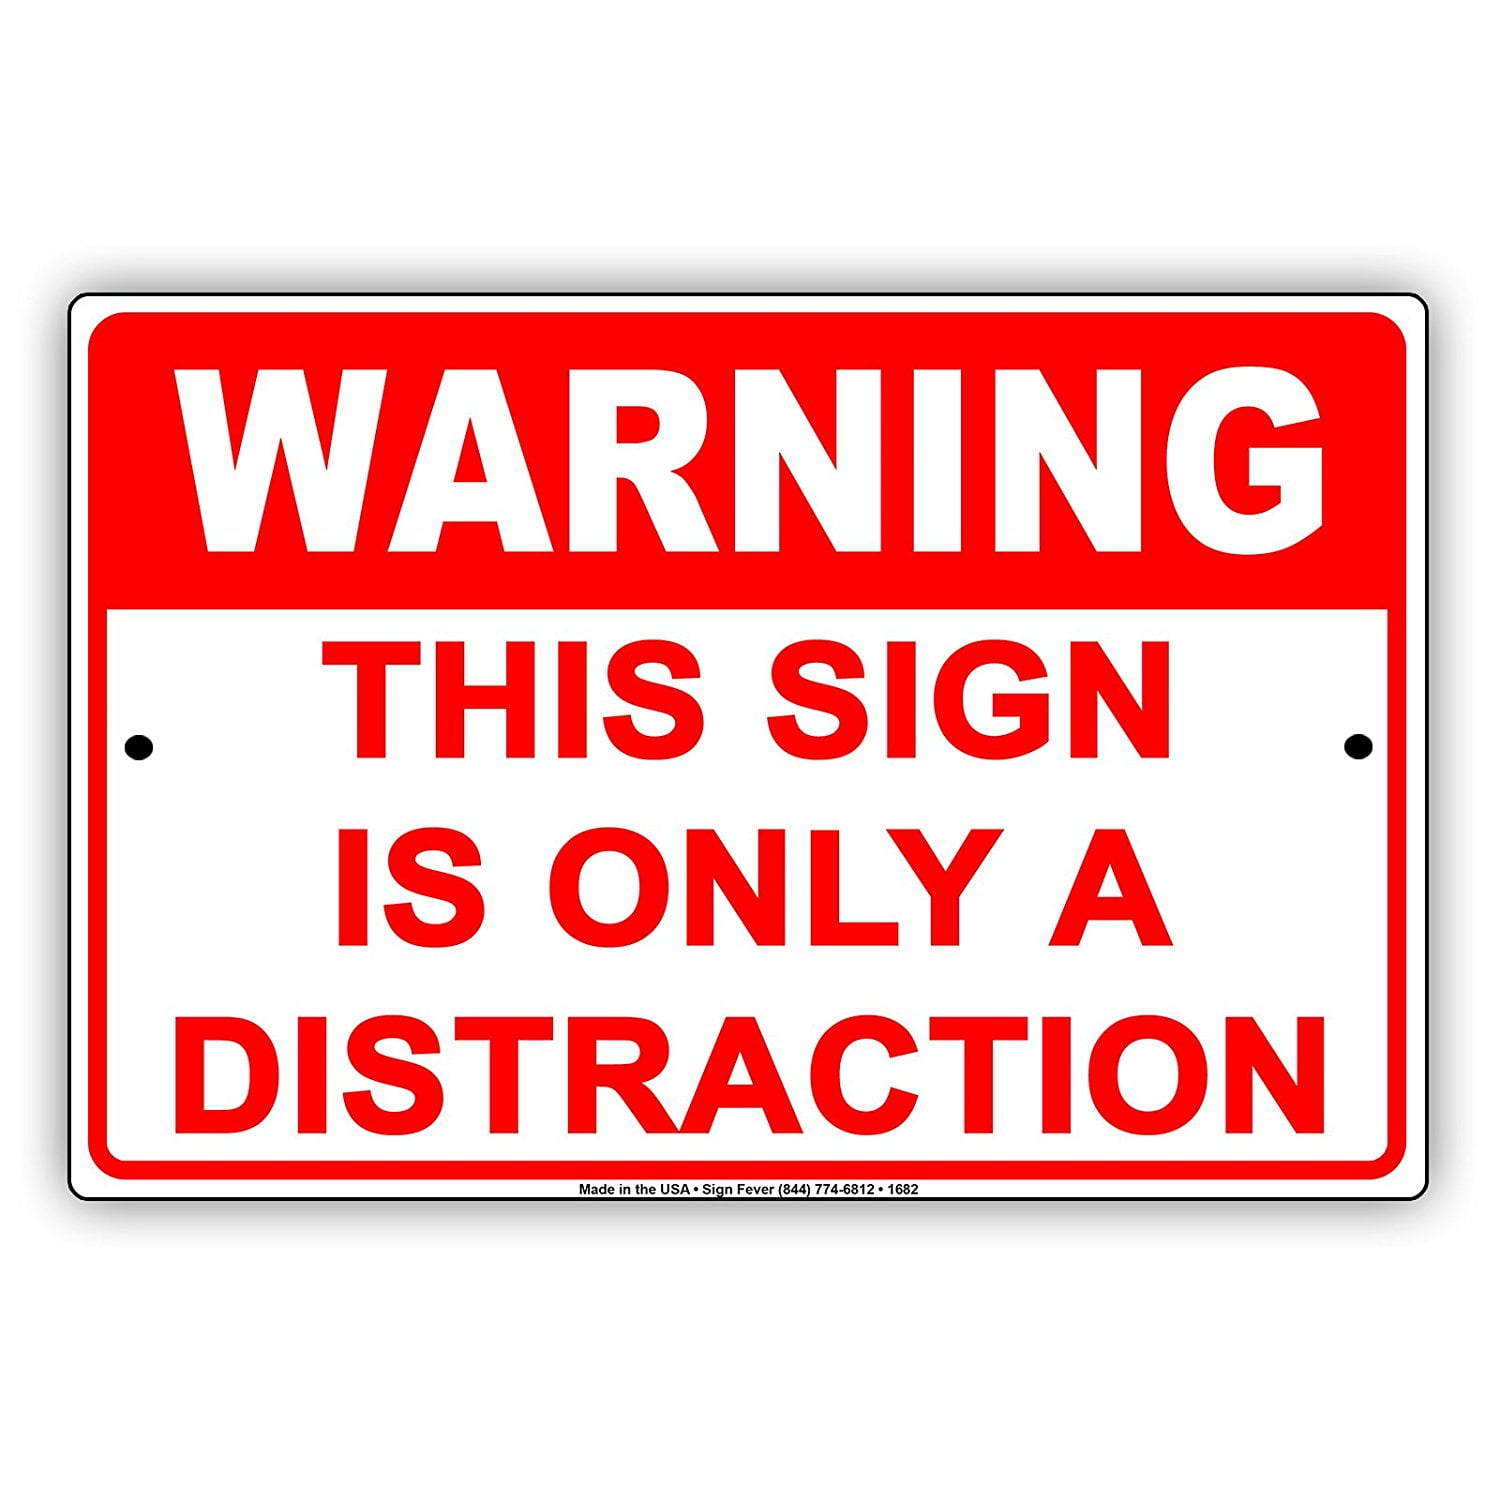 WARNING This Sign Is Only A Distraction Humor Gag Jokes Funny Meme Notice  Aluminum Note Metal Sign Plate 